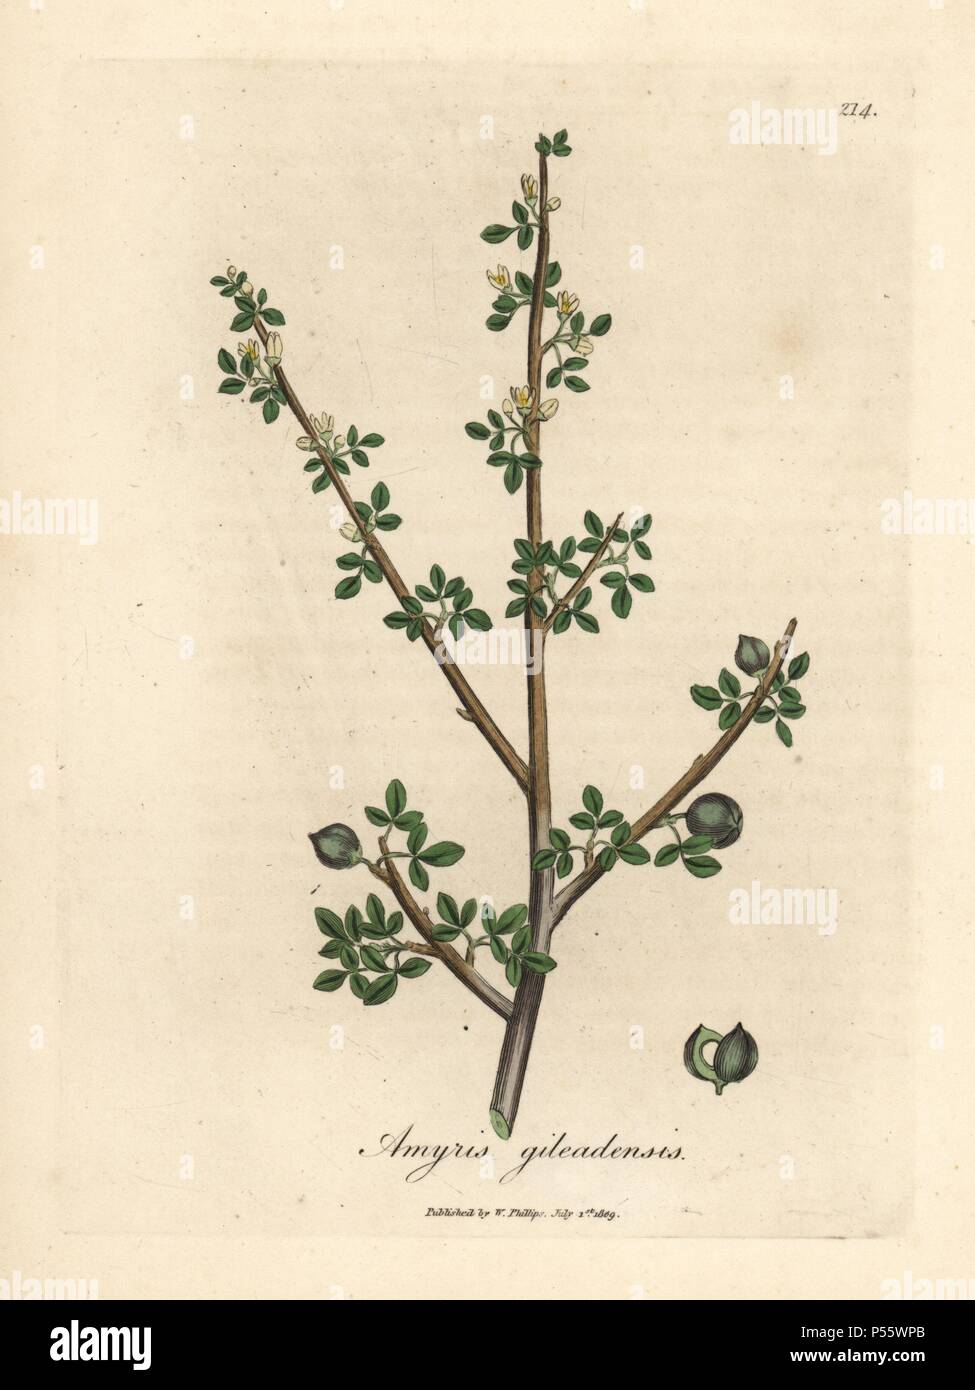 Balsam of Mecca, Commiphora gileadensis. Handcoloured copperplate engraving from a botanical illustration by James Sowerby from William Woodville and Sir William Jackson Hooker's 'Medical Botany,' John Bohn, London, 1832. The tireless Sowerby (1757-1822) drew over 2, 500 plants for Smith's mammoth 'English Botany' (1790-1814) and 440 mushrooms for 'Coloured Figures of English Fungi ' (1797) among many other works. Stock Photo